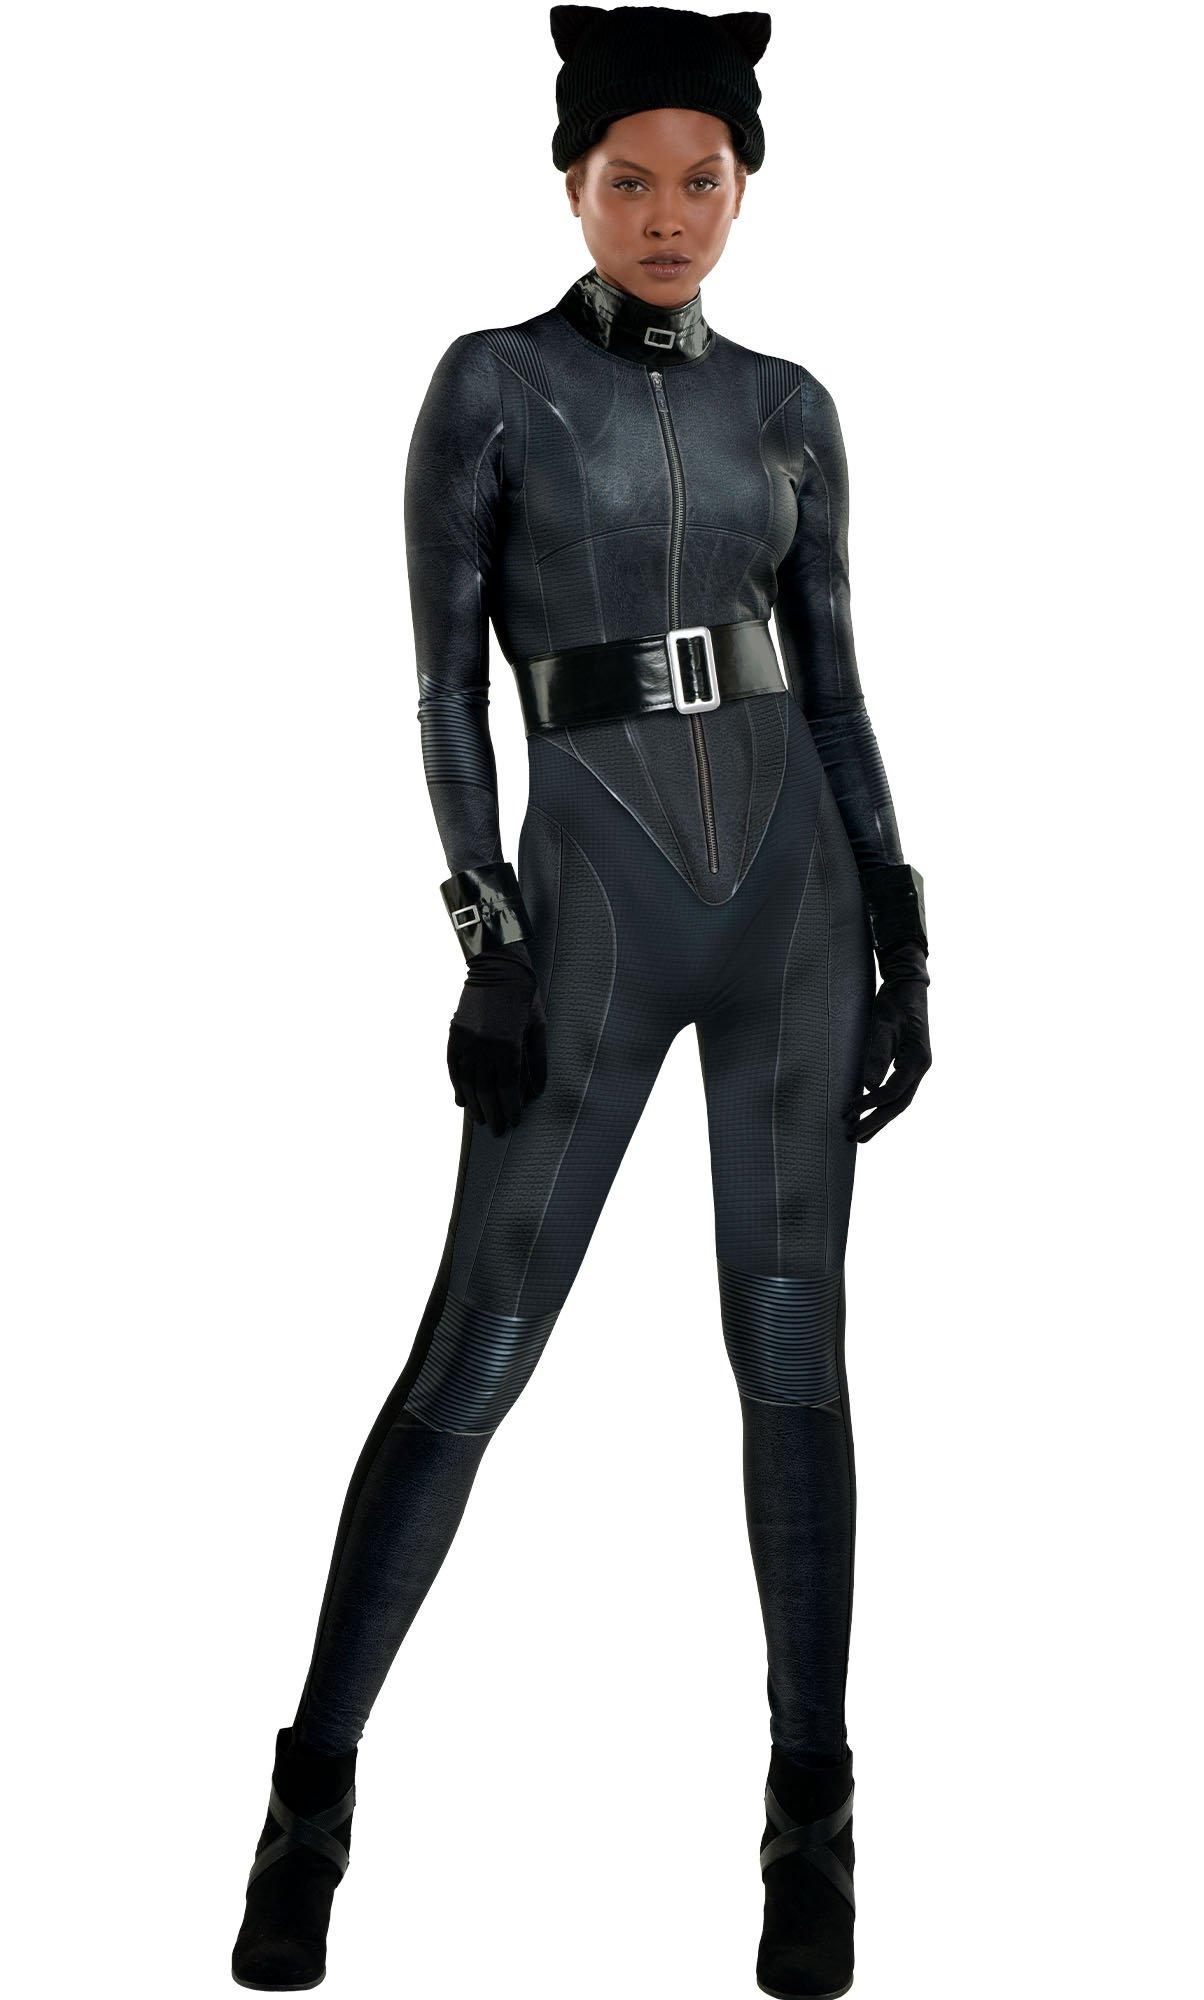 Adult Catwoman Costume - The Batman | Party City